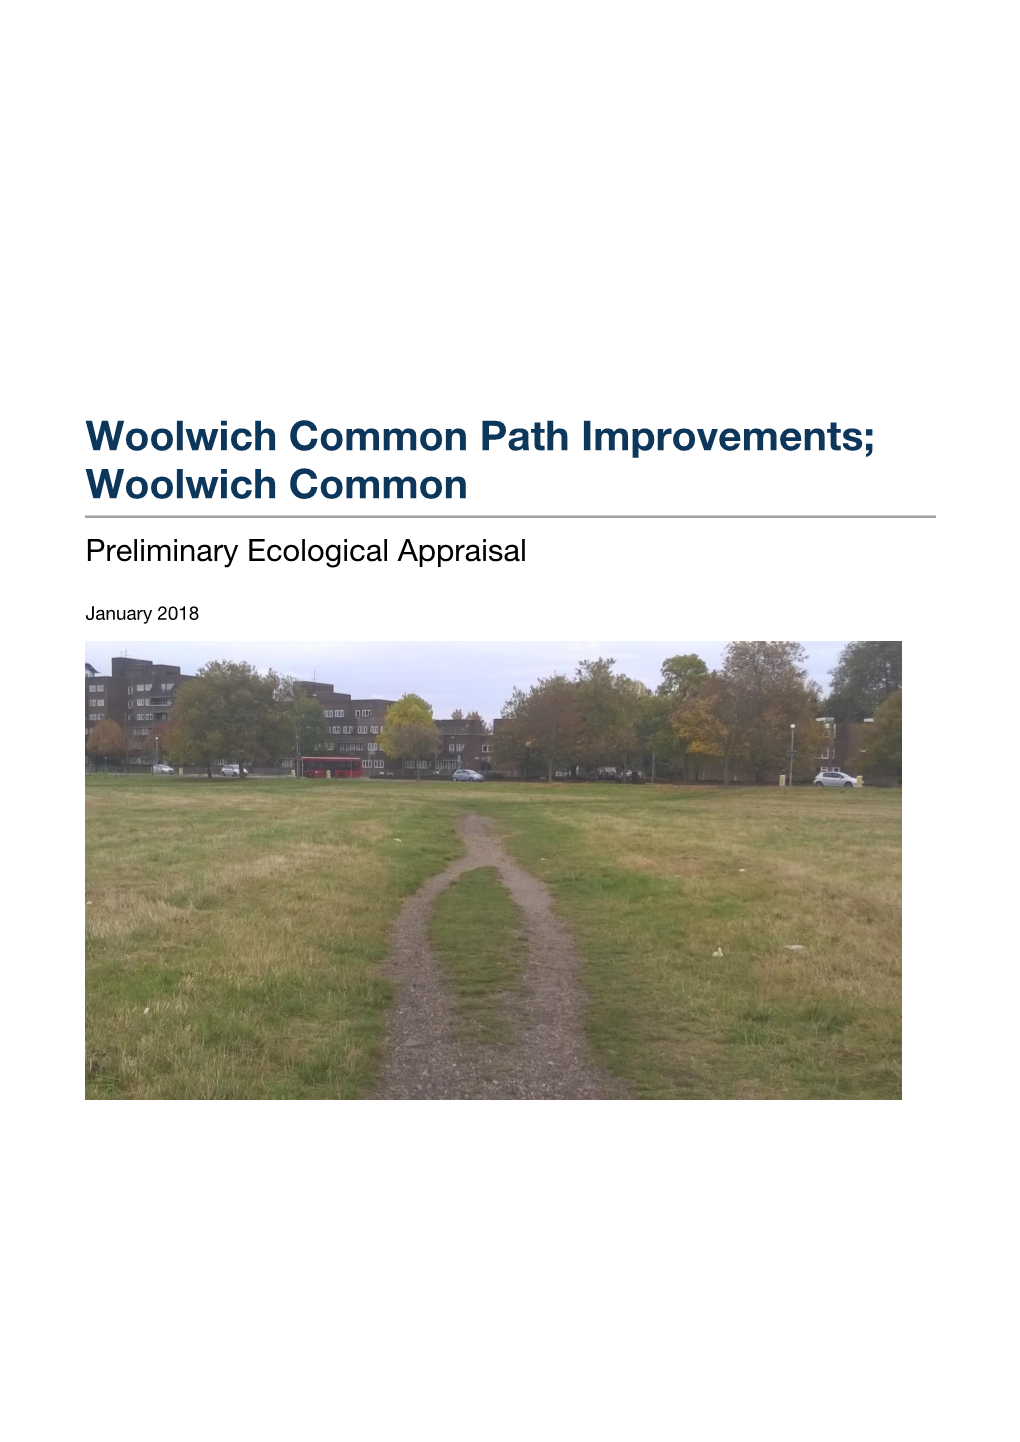 Woolwich Common Path Improvements; Woolwich Common Preliminary Ecological Appraisal